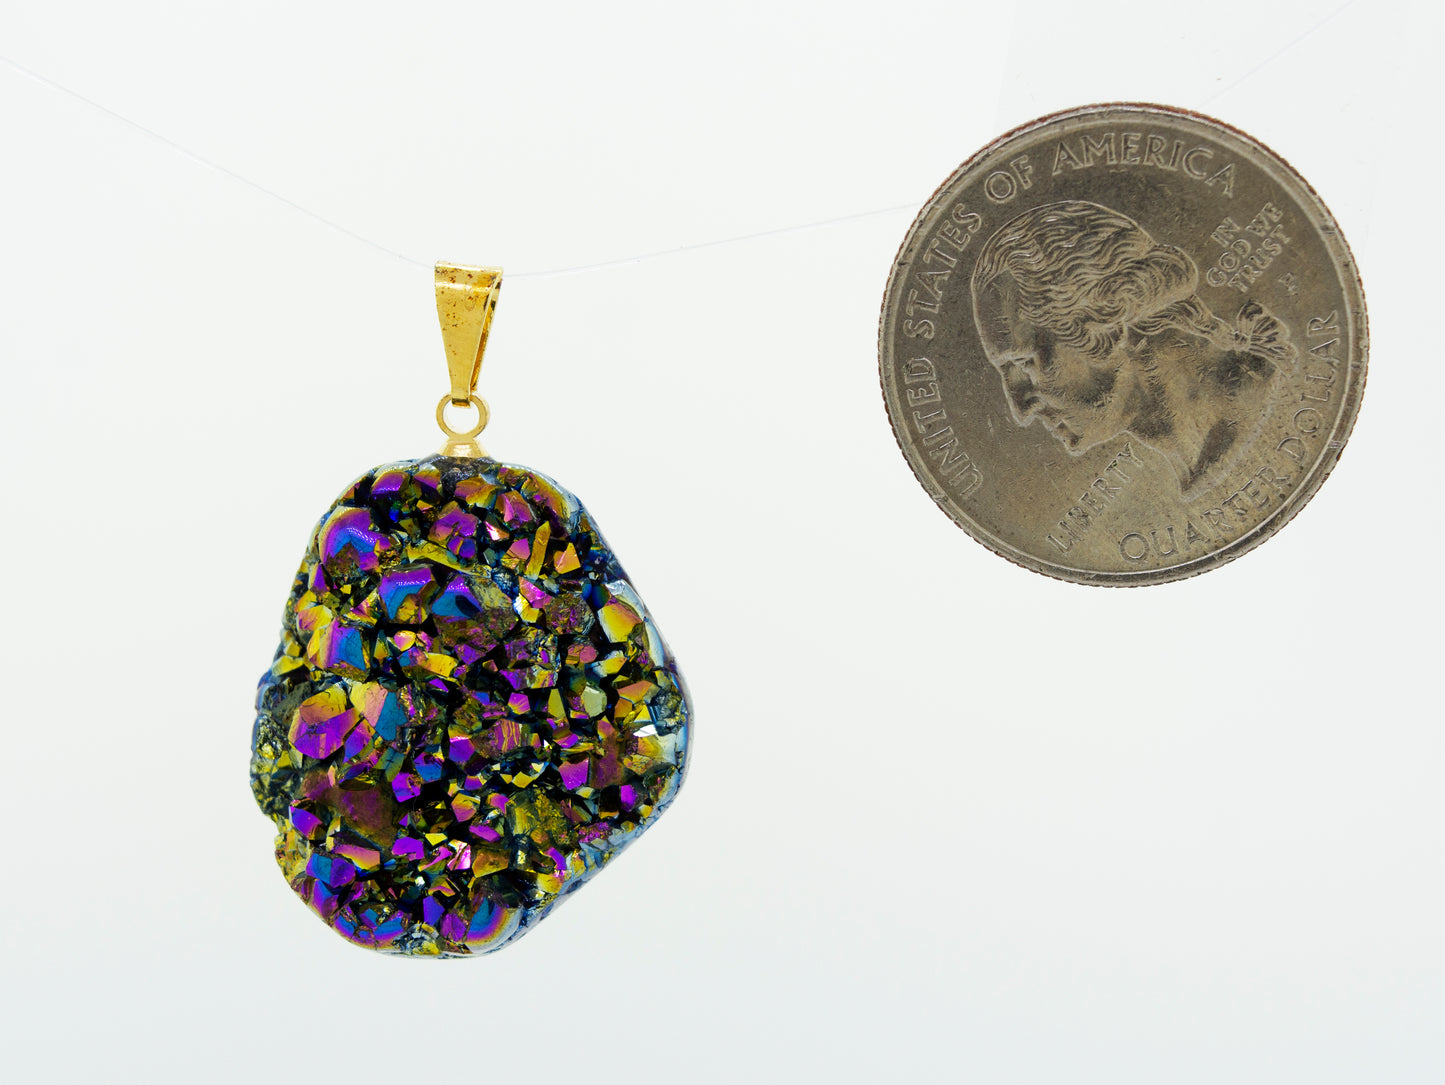 A Super Silver Dazzling Druzy Pendant with a dime next to it.